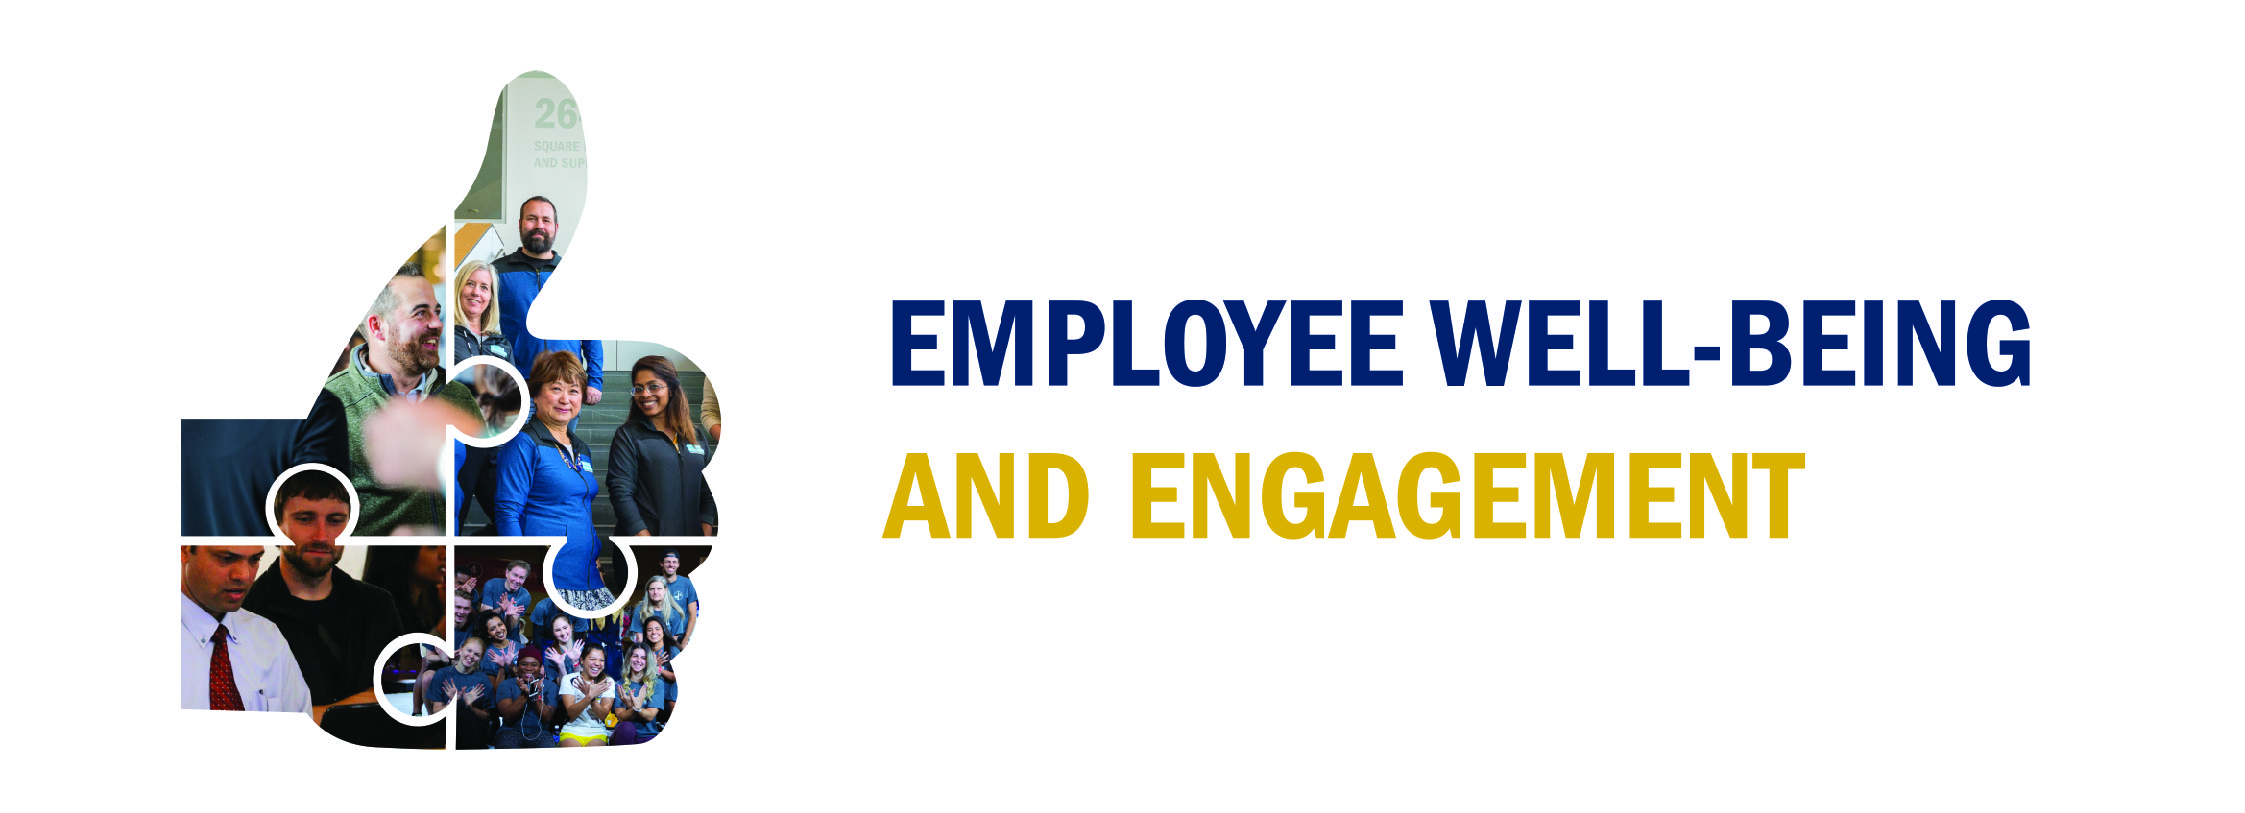 Employee Well-Being and Engagement